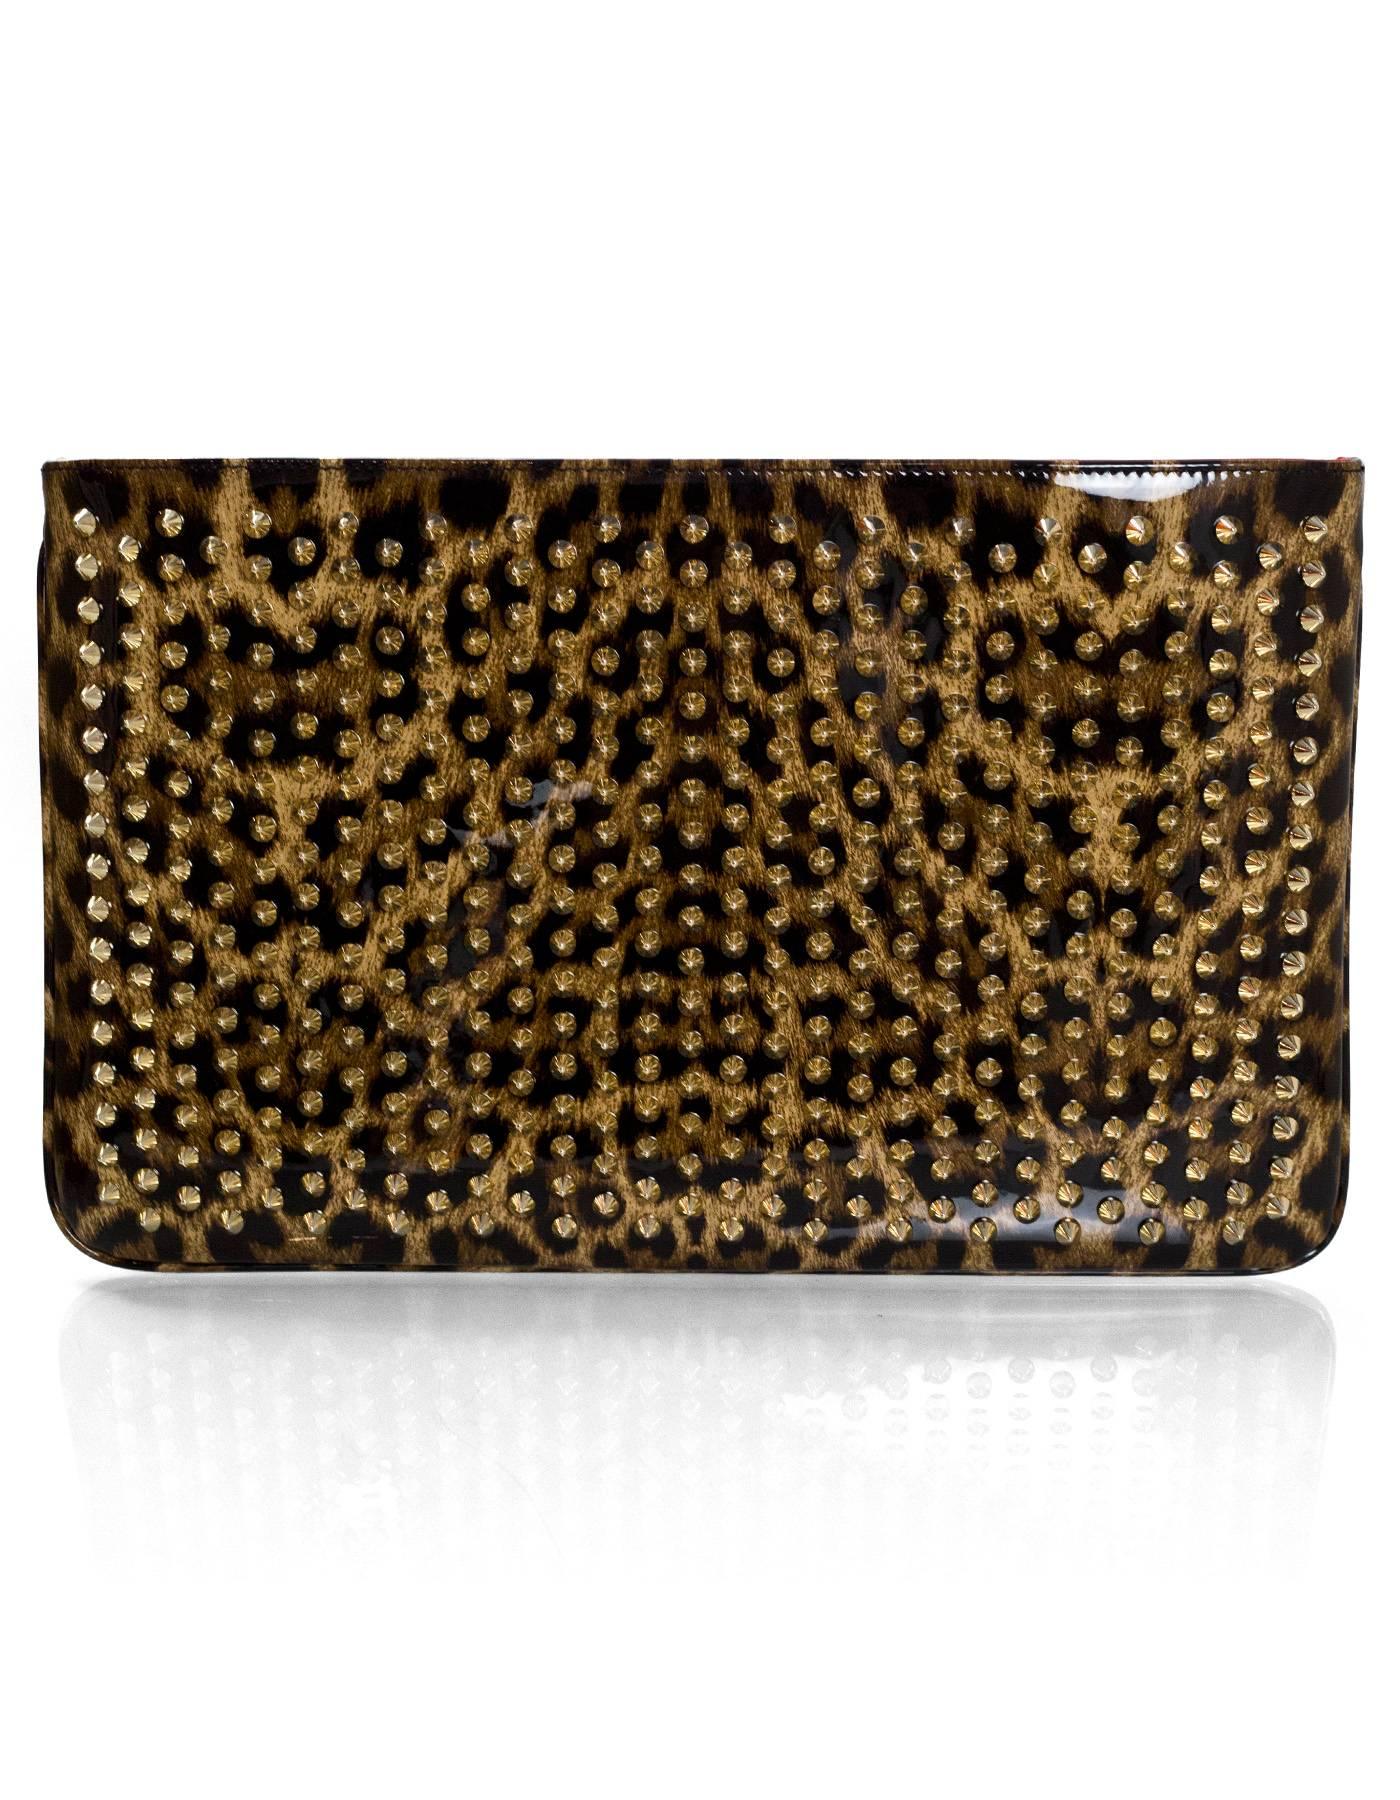 Christian Louboutin Posh Spikes Patent Leopard Clutch/Crossbody Bag In Excellent Condition In New York, NY